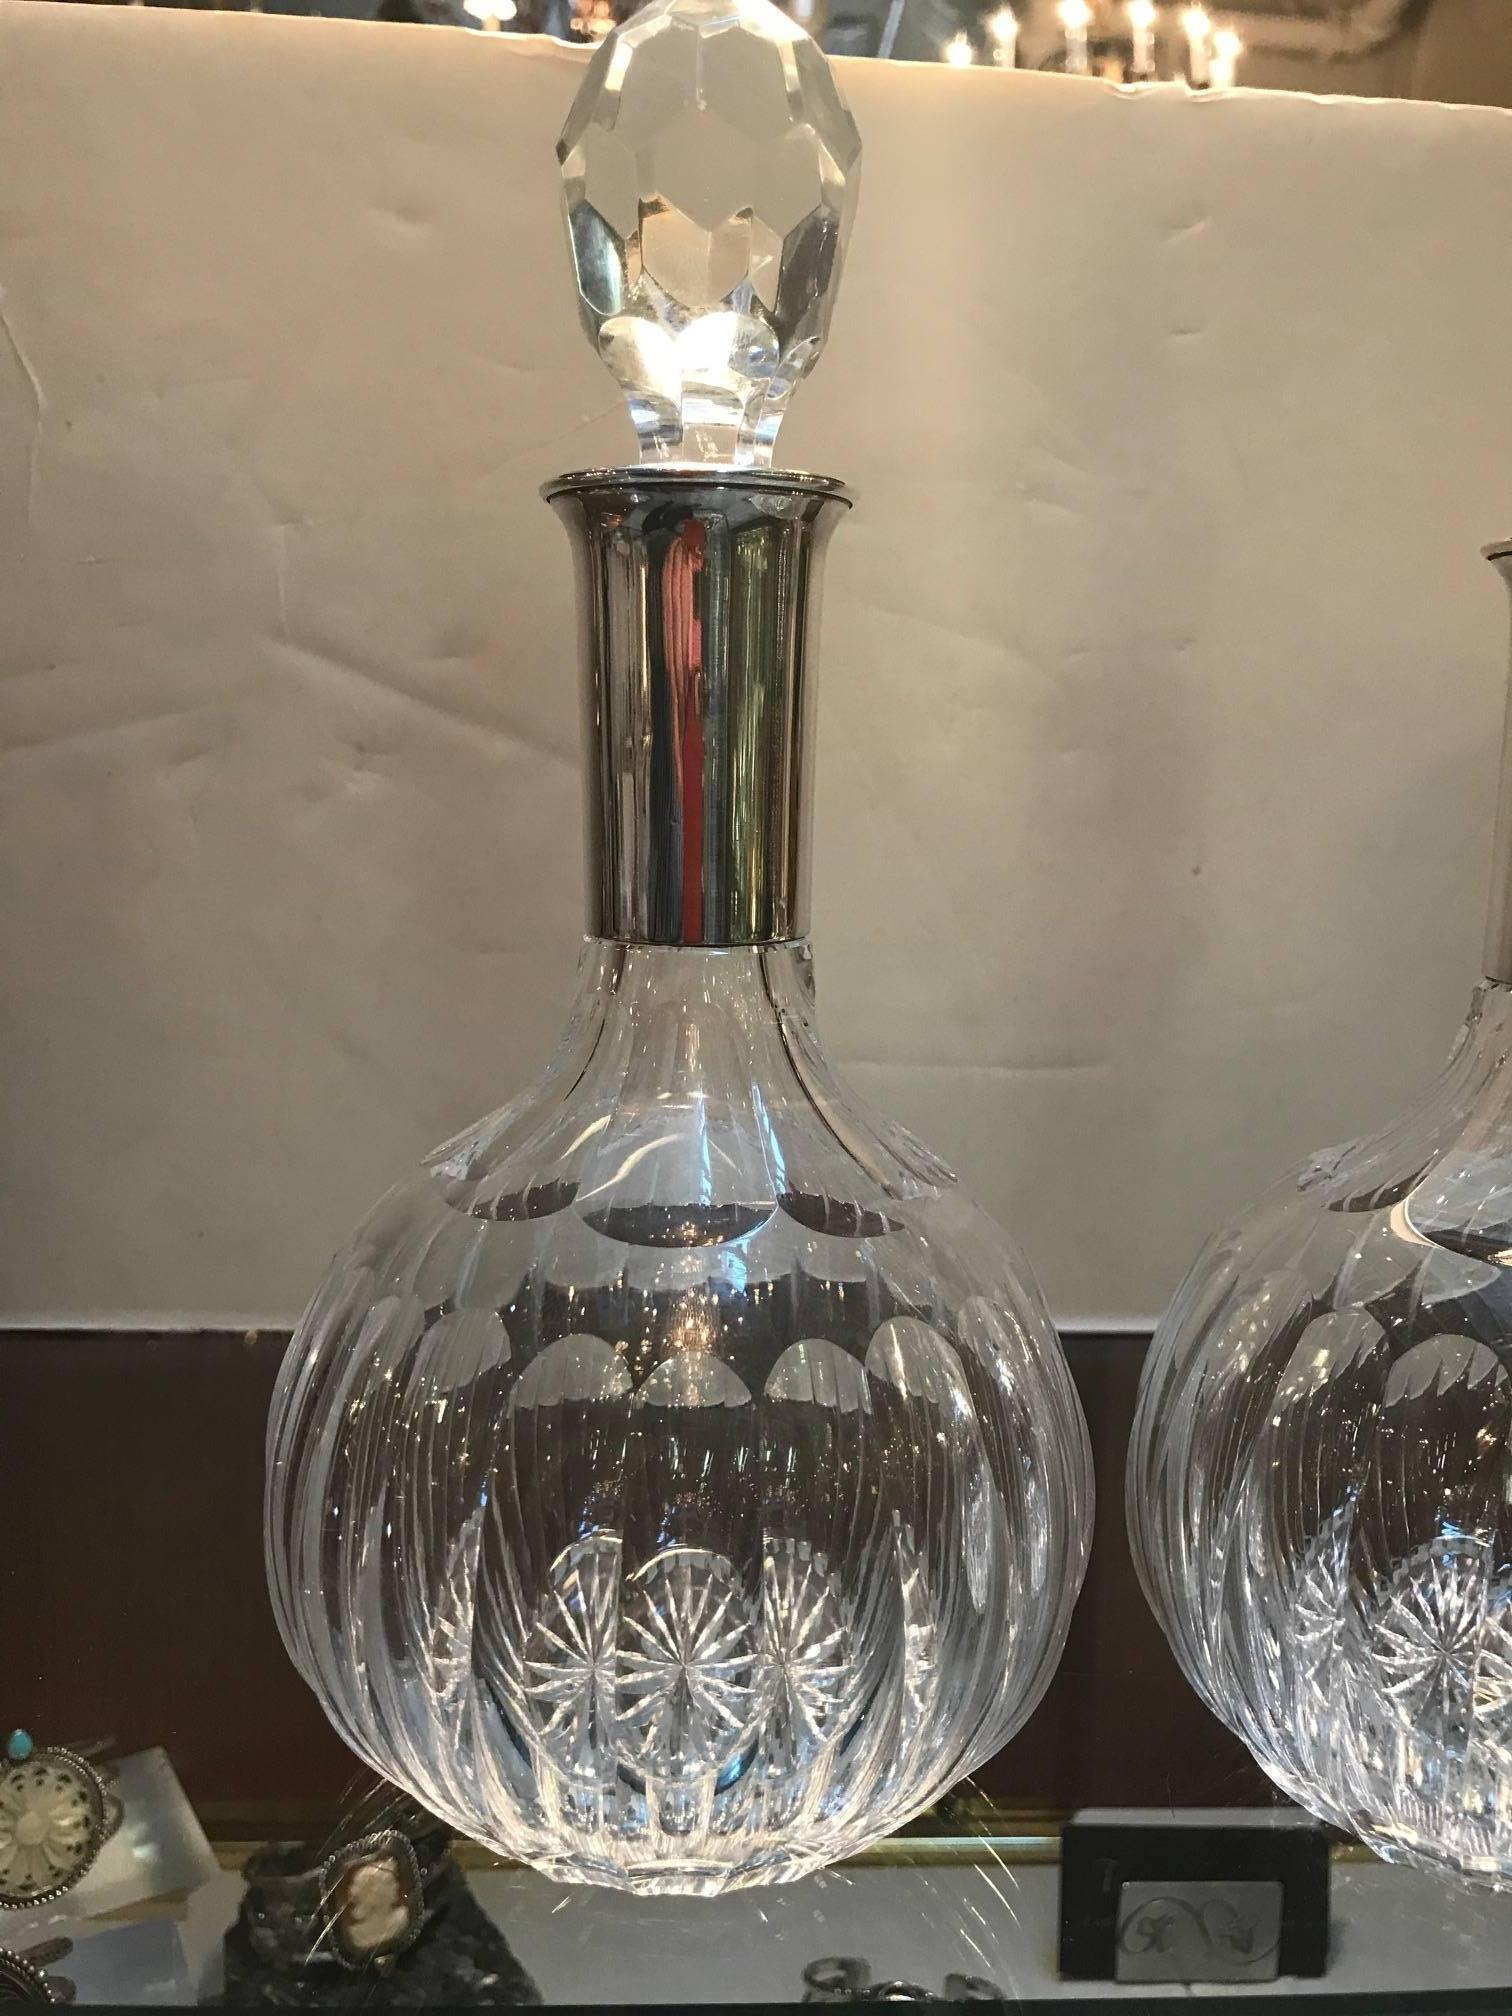 A pair of cut crystal decanters made by Baccarat for Cartier with sterling silver necks. The necks are marked Cartier next to the sterling silver mark which is viewable with a magnifier. Glamorous, mid-20th century decanters made by the best crystal